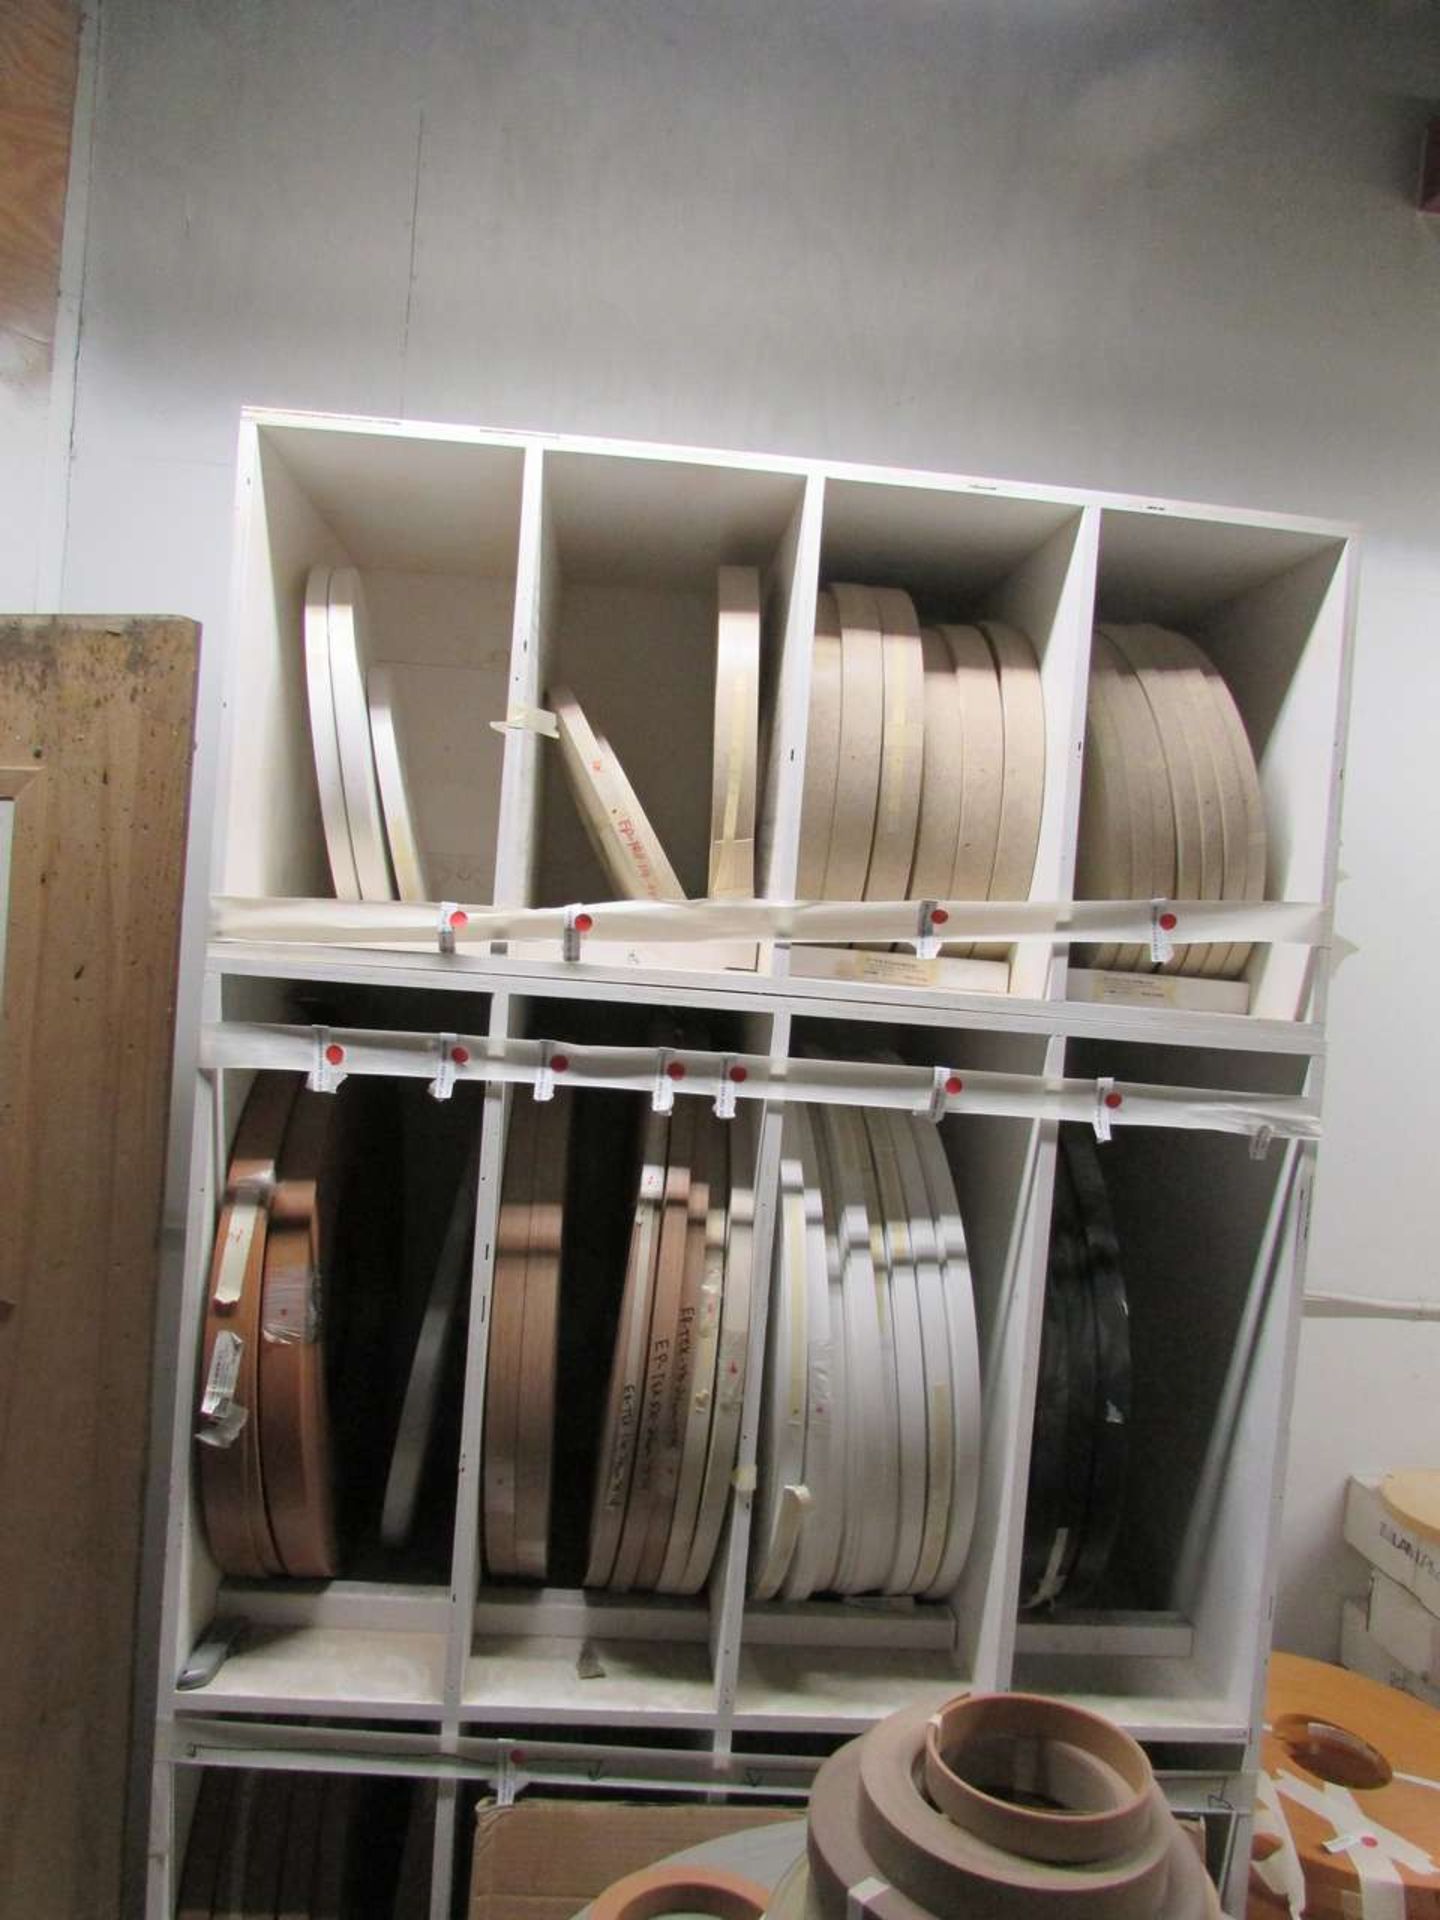 Contents of Edge Banding Room - Image 5 of 6